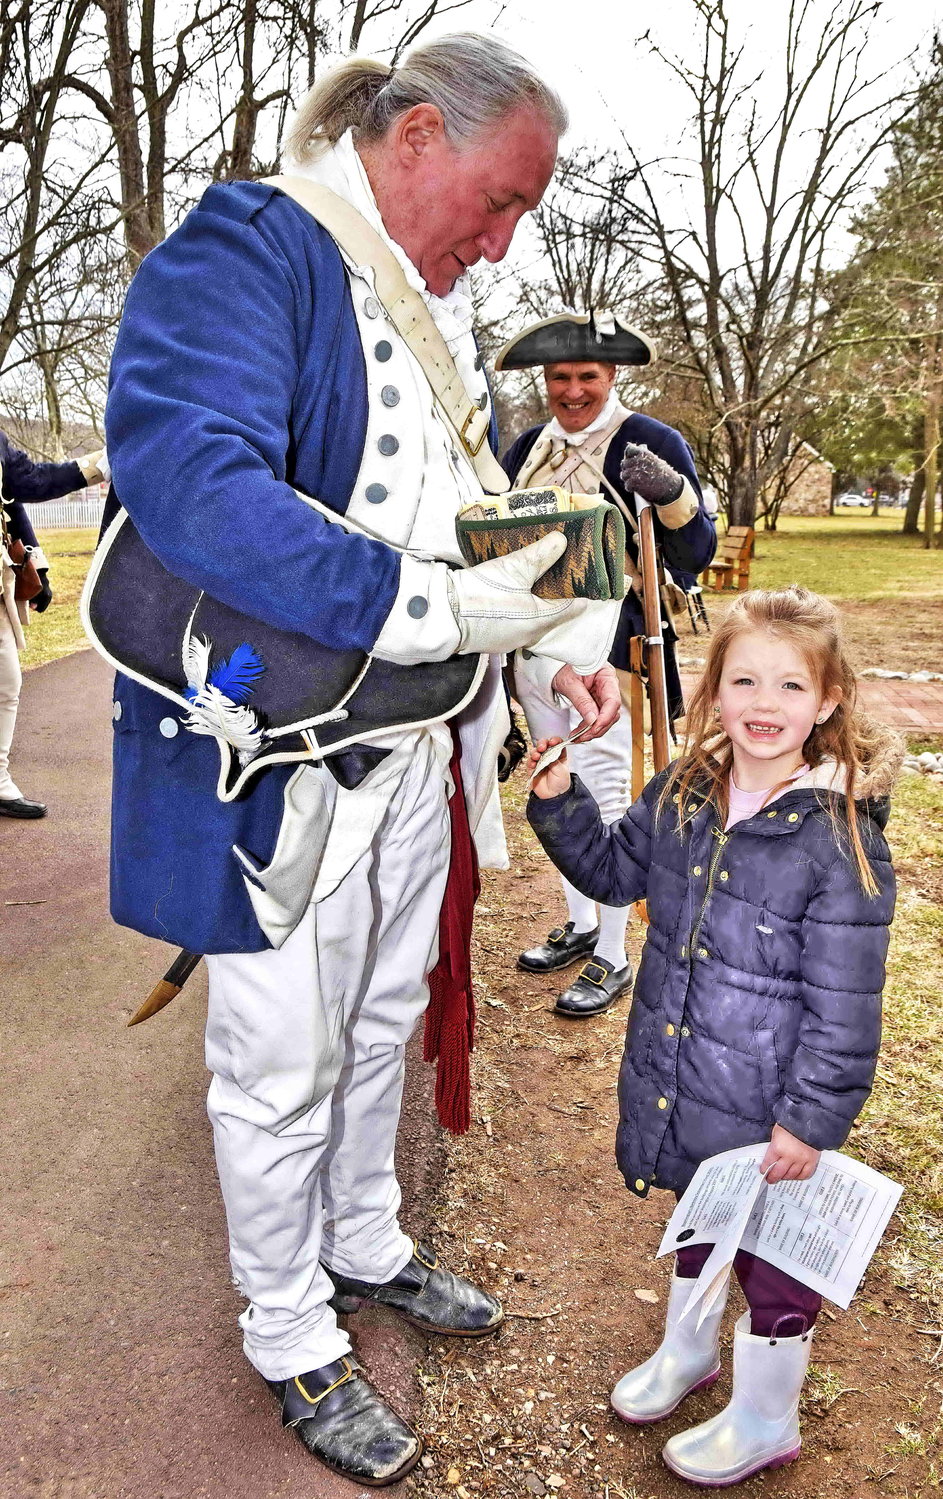 A soldier presents replica Colonial currency to Brantley McCoy, 5.